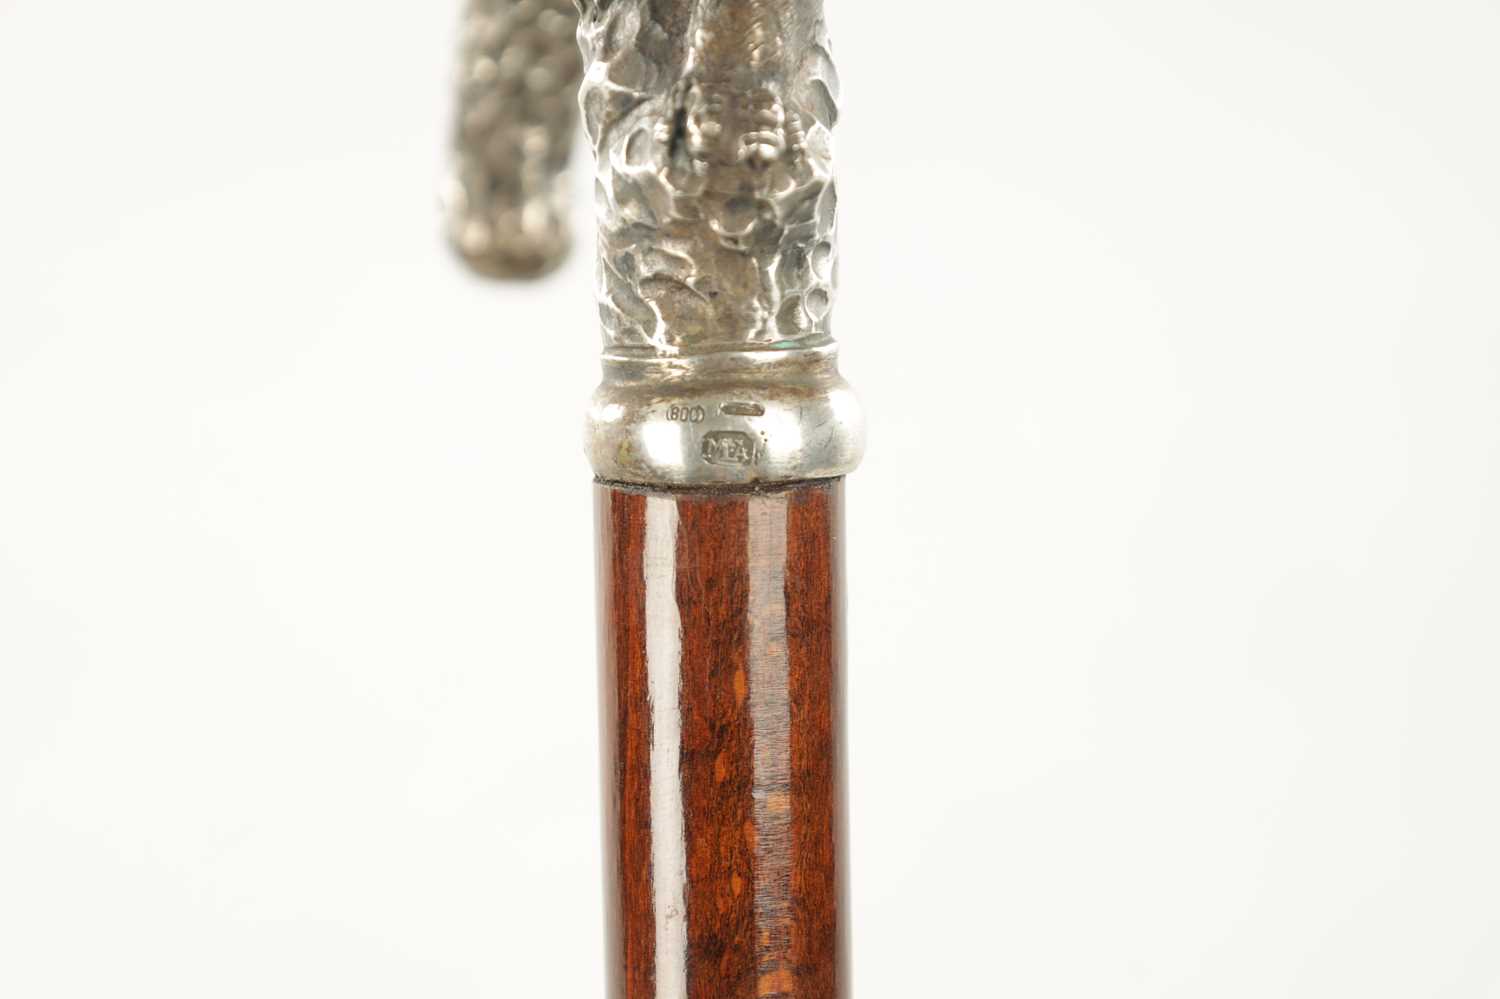 A LATE 19TH CENTURY SILVER TOPPED WALKING STICK MODELLED AS A PROWLING LION - Image 5 of 7